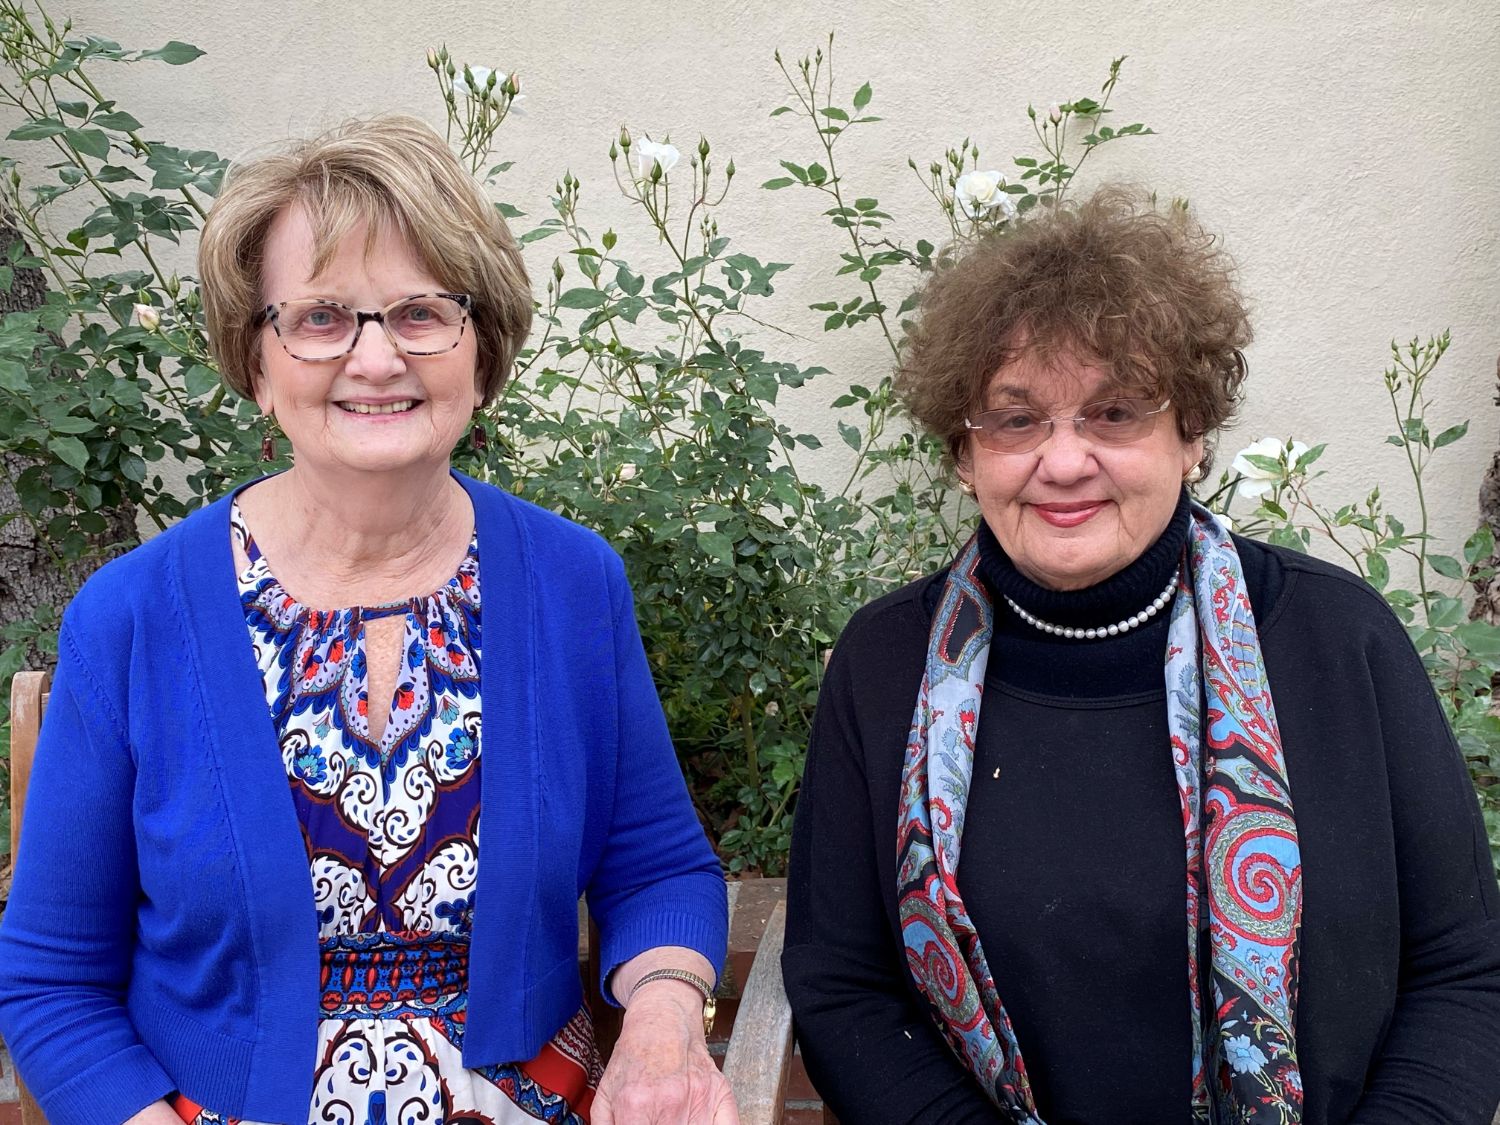 PHOTO: provided by organization | The South Pasadenan | Sally Kilby, left, and Ellen Daigle will be honored with Senior Champion Awards on Monday, August 14, from the Senior Citizens’ Foundation of South Pasadena.